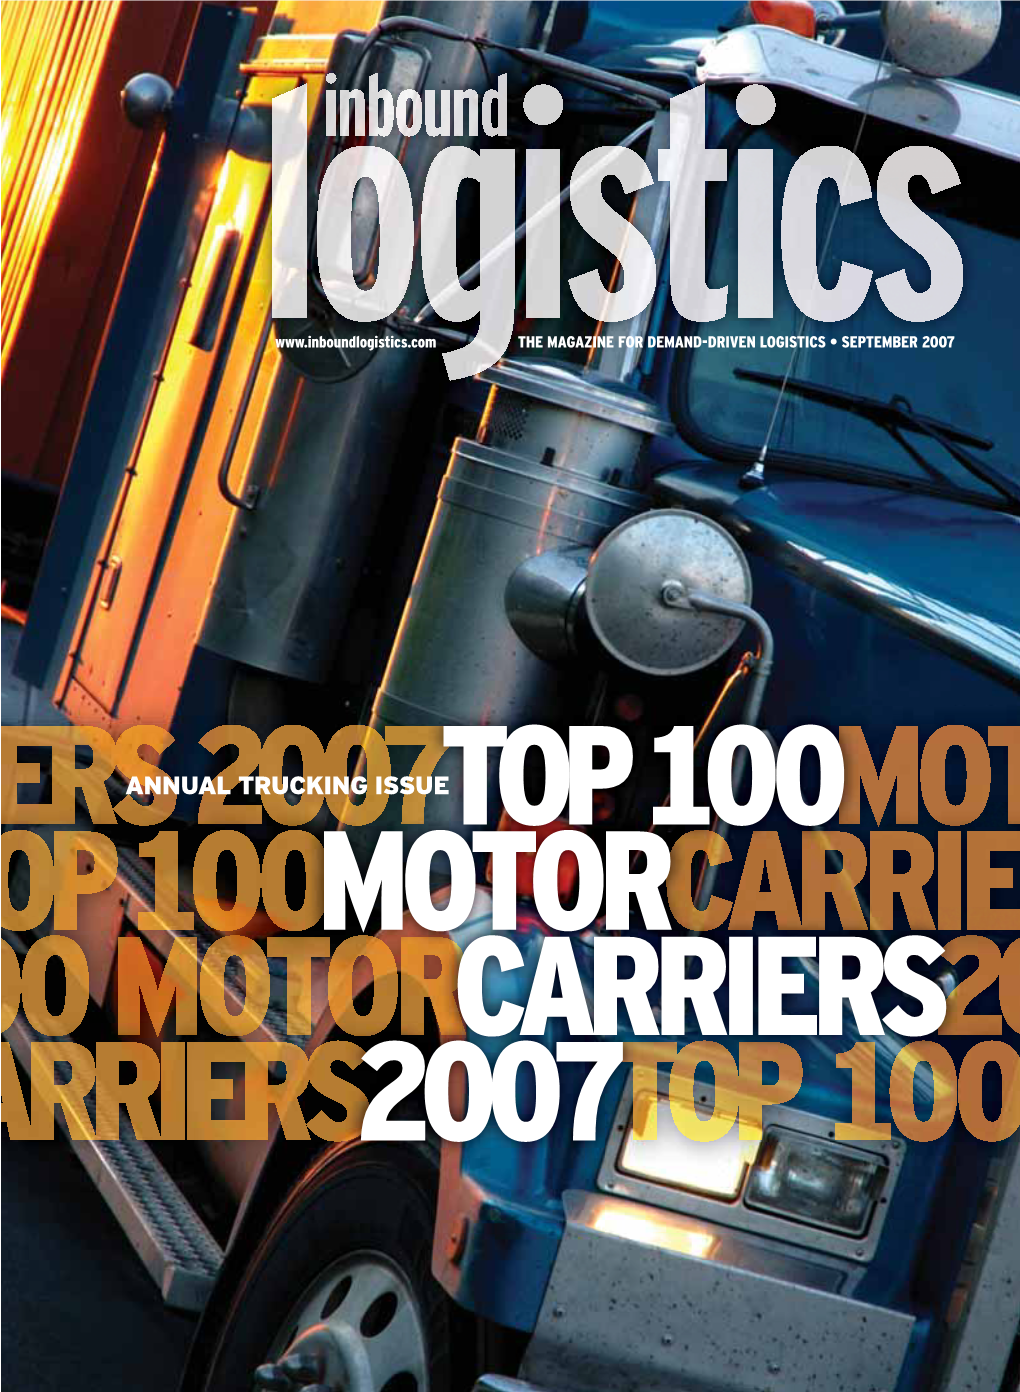 ANNUAL TRUCKING ISSUETOP 100 MOTOR CARRIERS 2007 Deliver the Goods